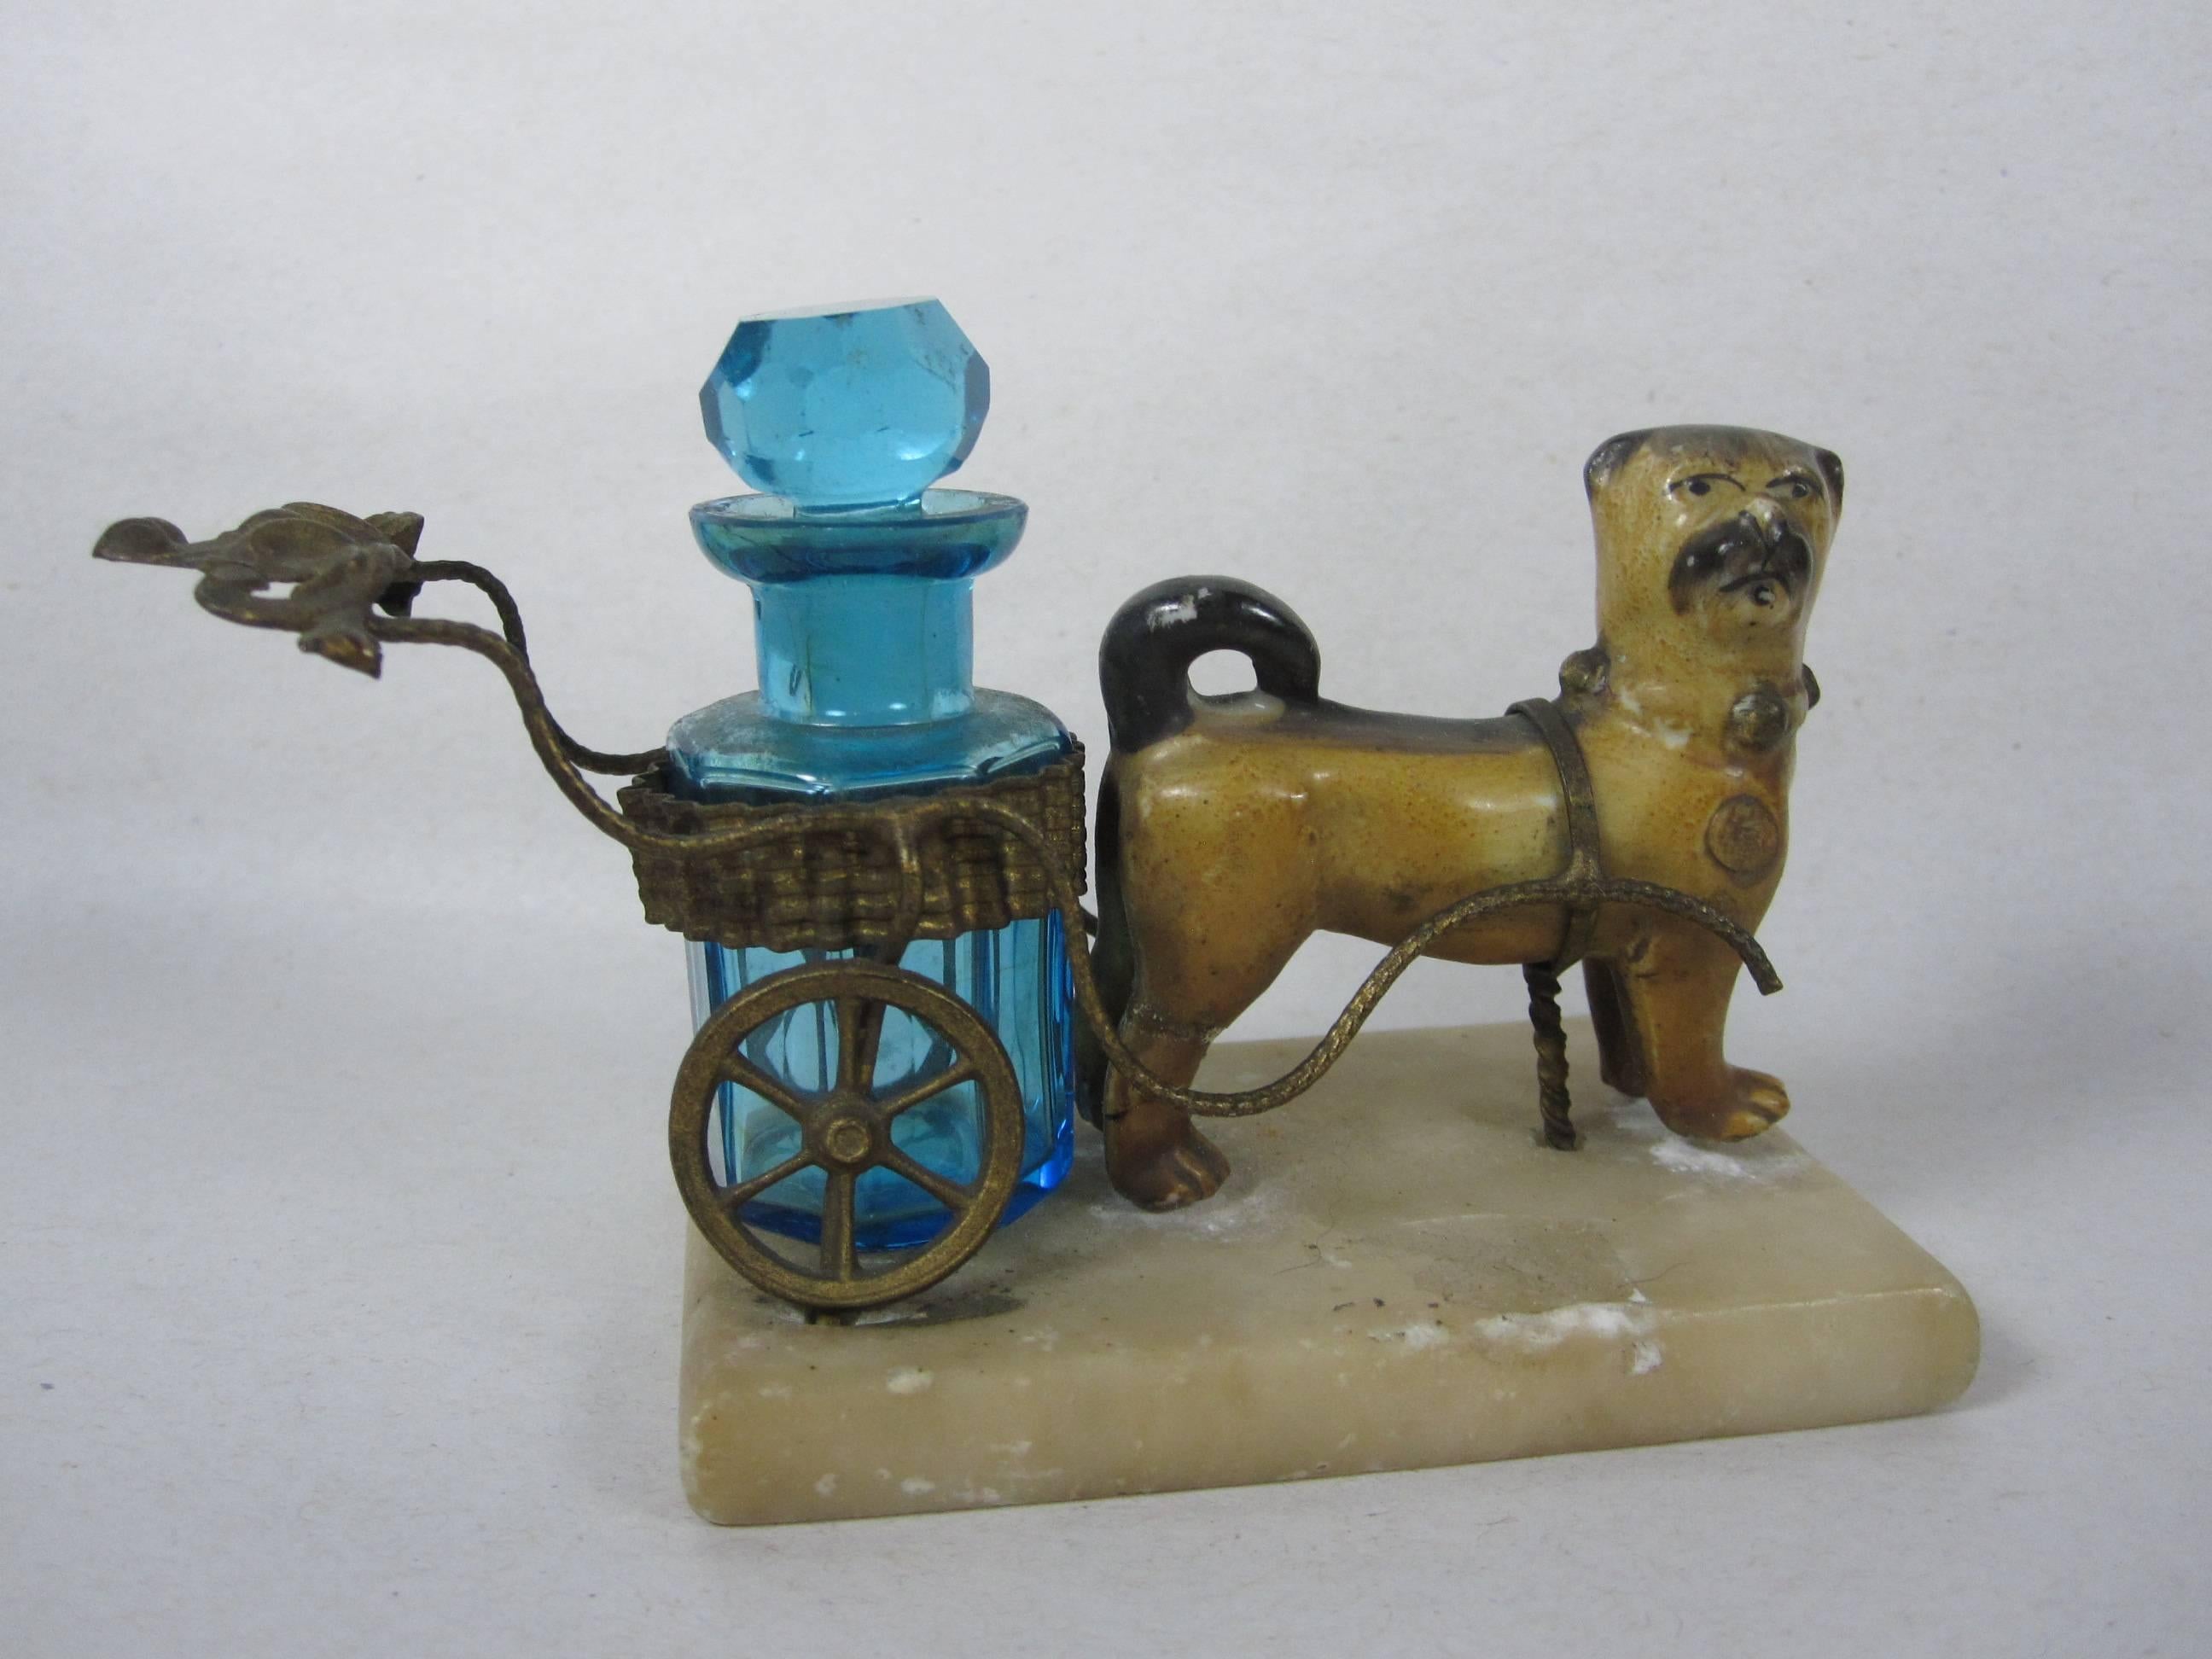 A marvelous Grand Tour souvenir bibelot, showing a Pug dog pulling an ormolu cart holding a bright turquoise, paneled crystal scent bottle with a faceted stopper. The delightful dog and his cart are attached to an alabaster base. Wonderful detailing